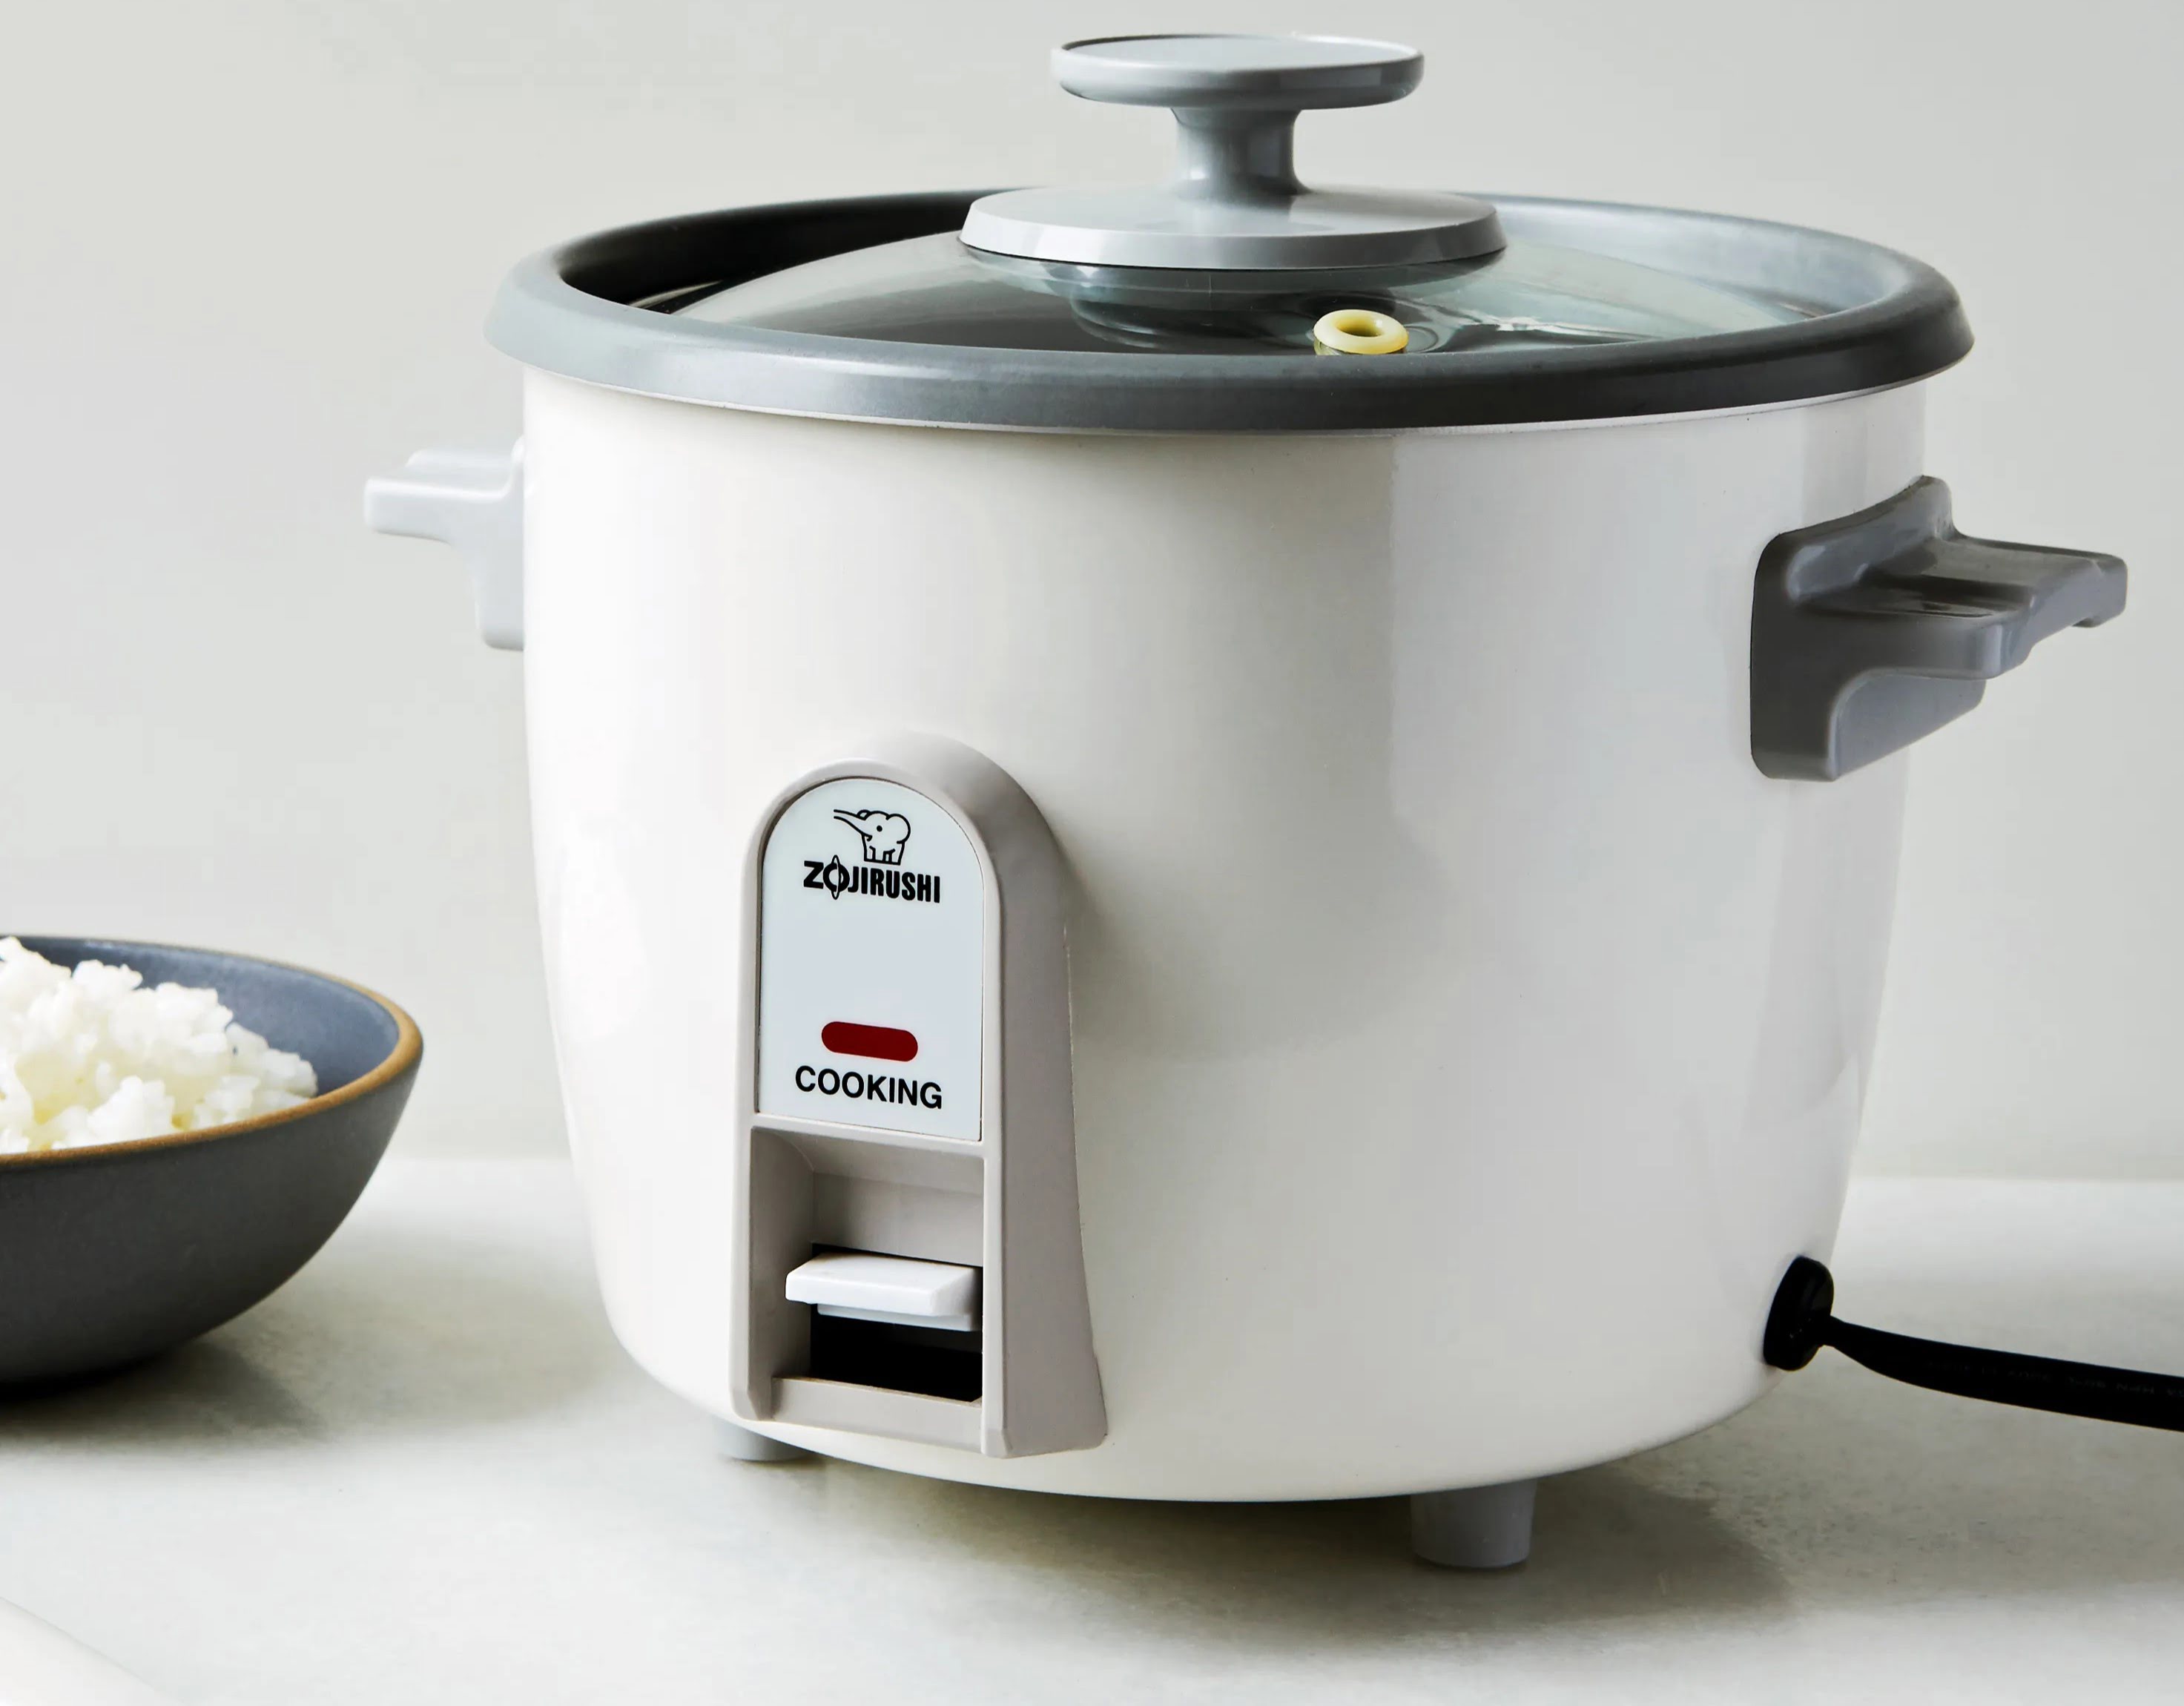 Top Rice Cooker Review: Find the Perfect Appliance for Your Kitchen